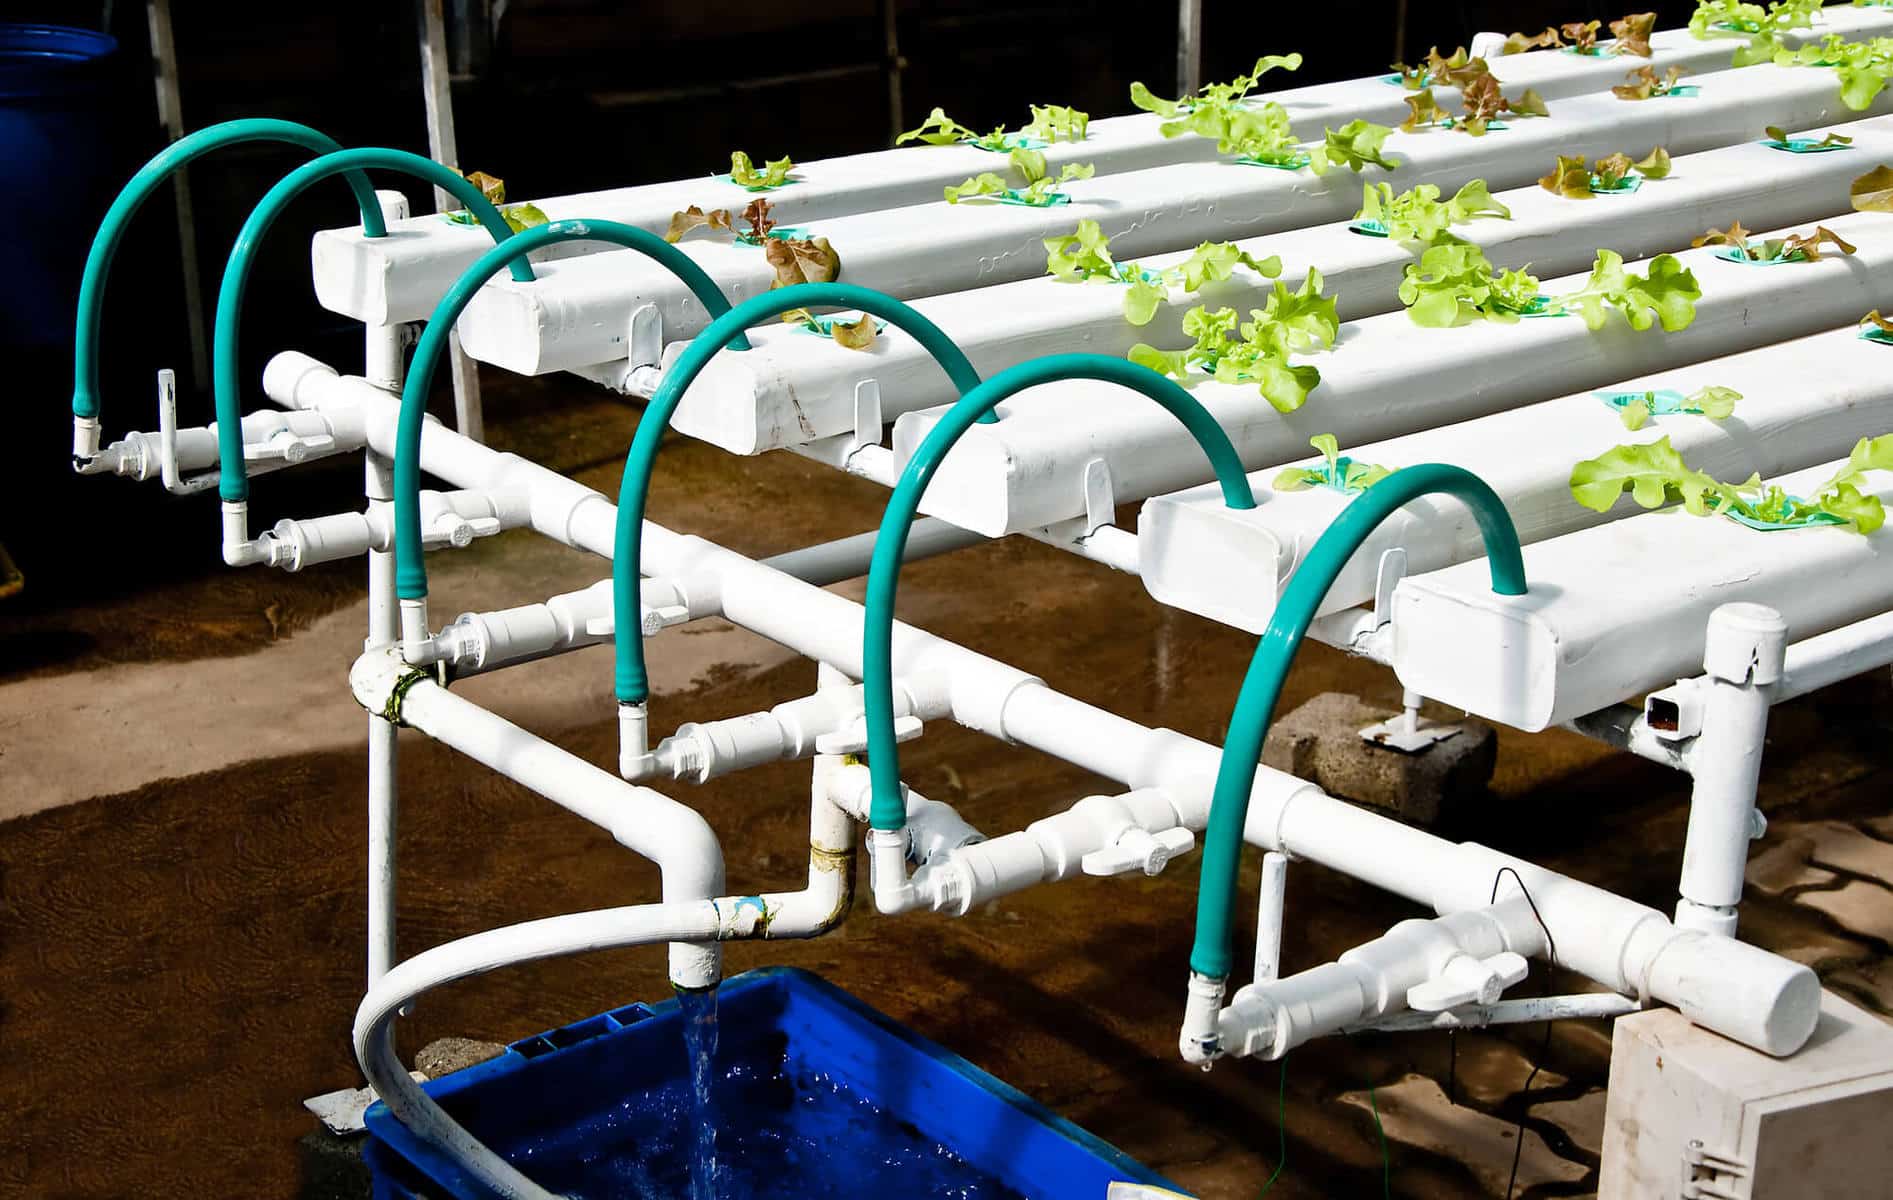 How To Prevent Mold In Hydroponics